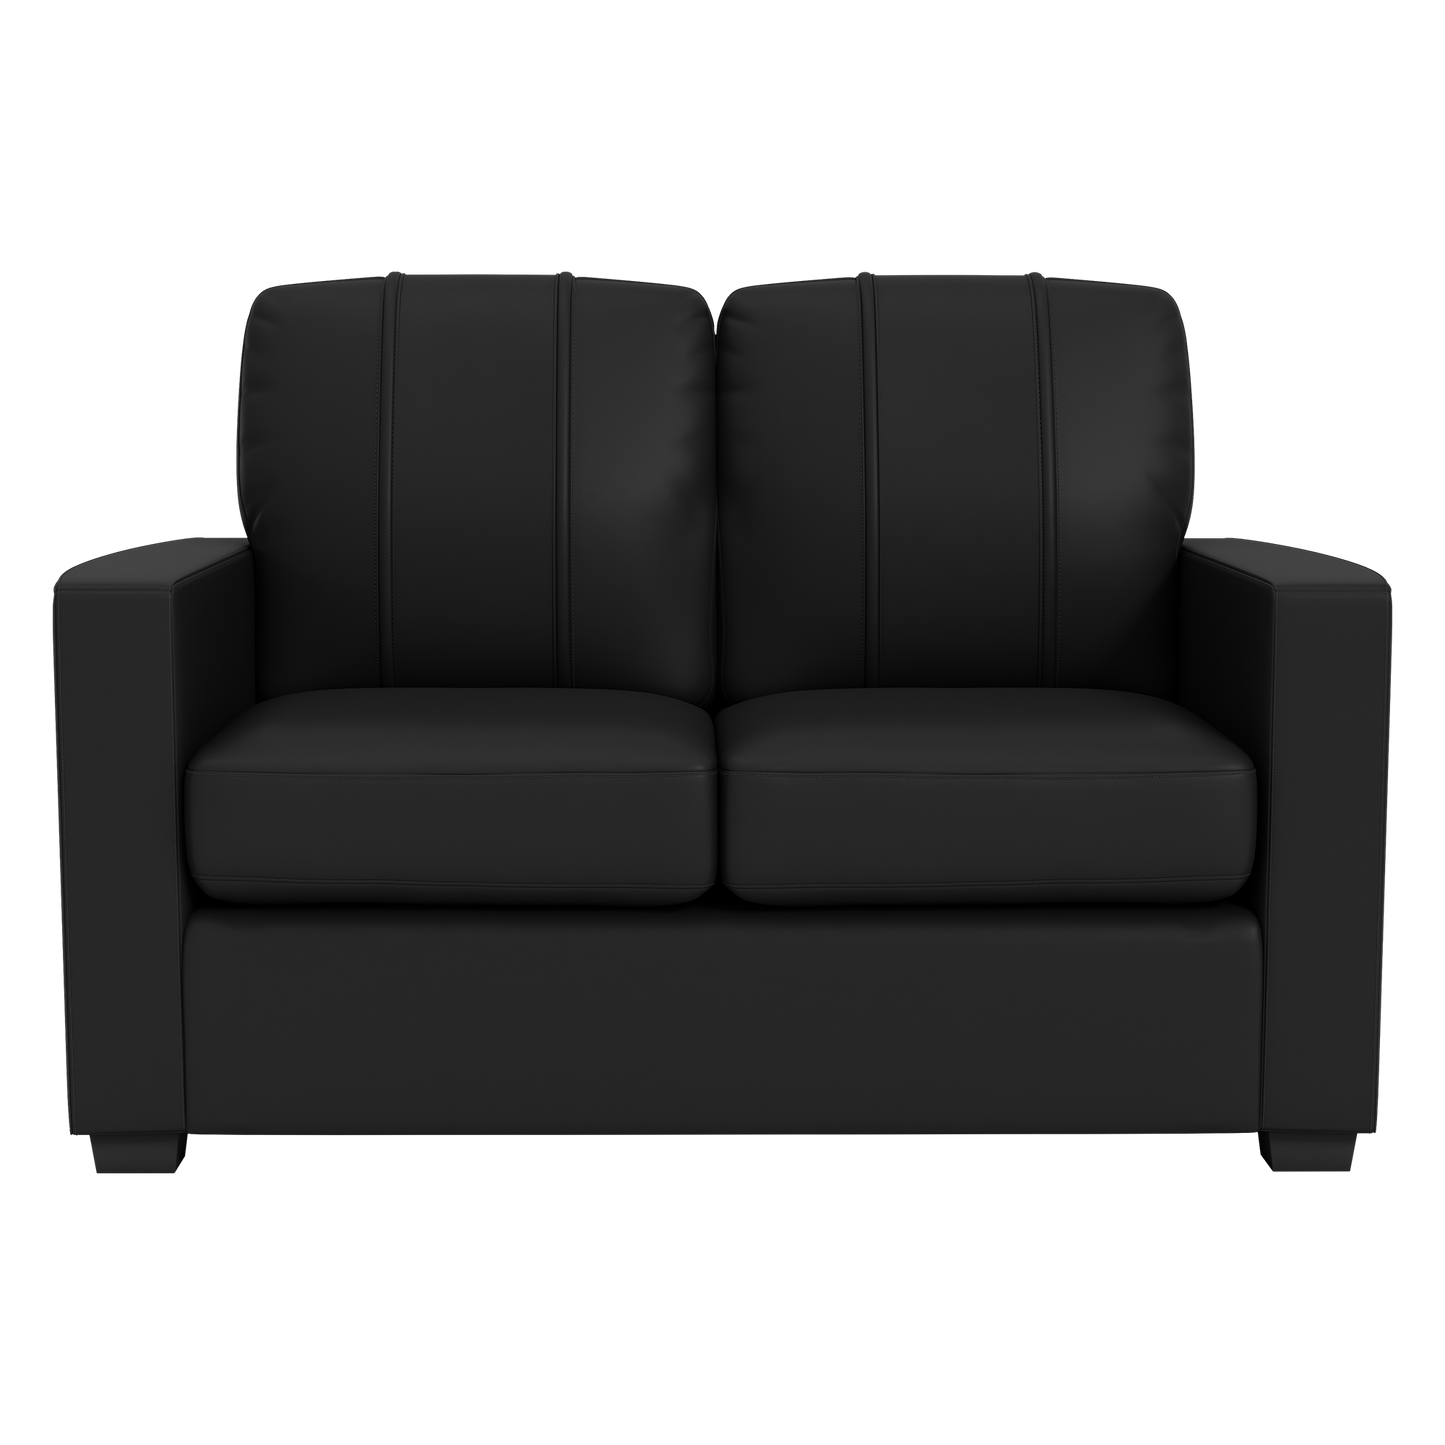 Silver Loveseat with Seattle Sounders FC Primary Logo